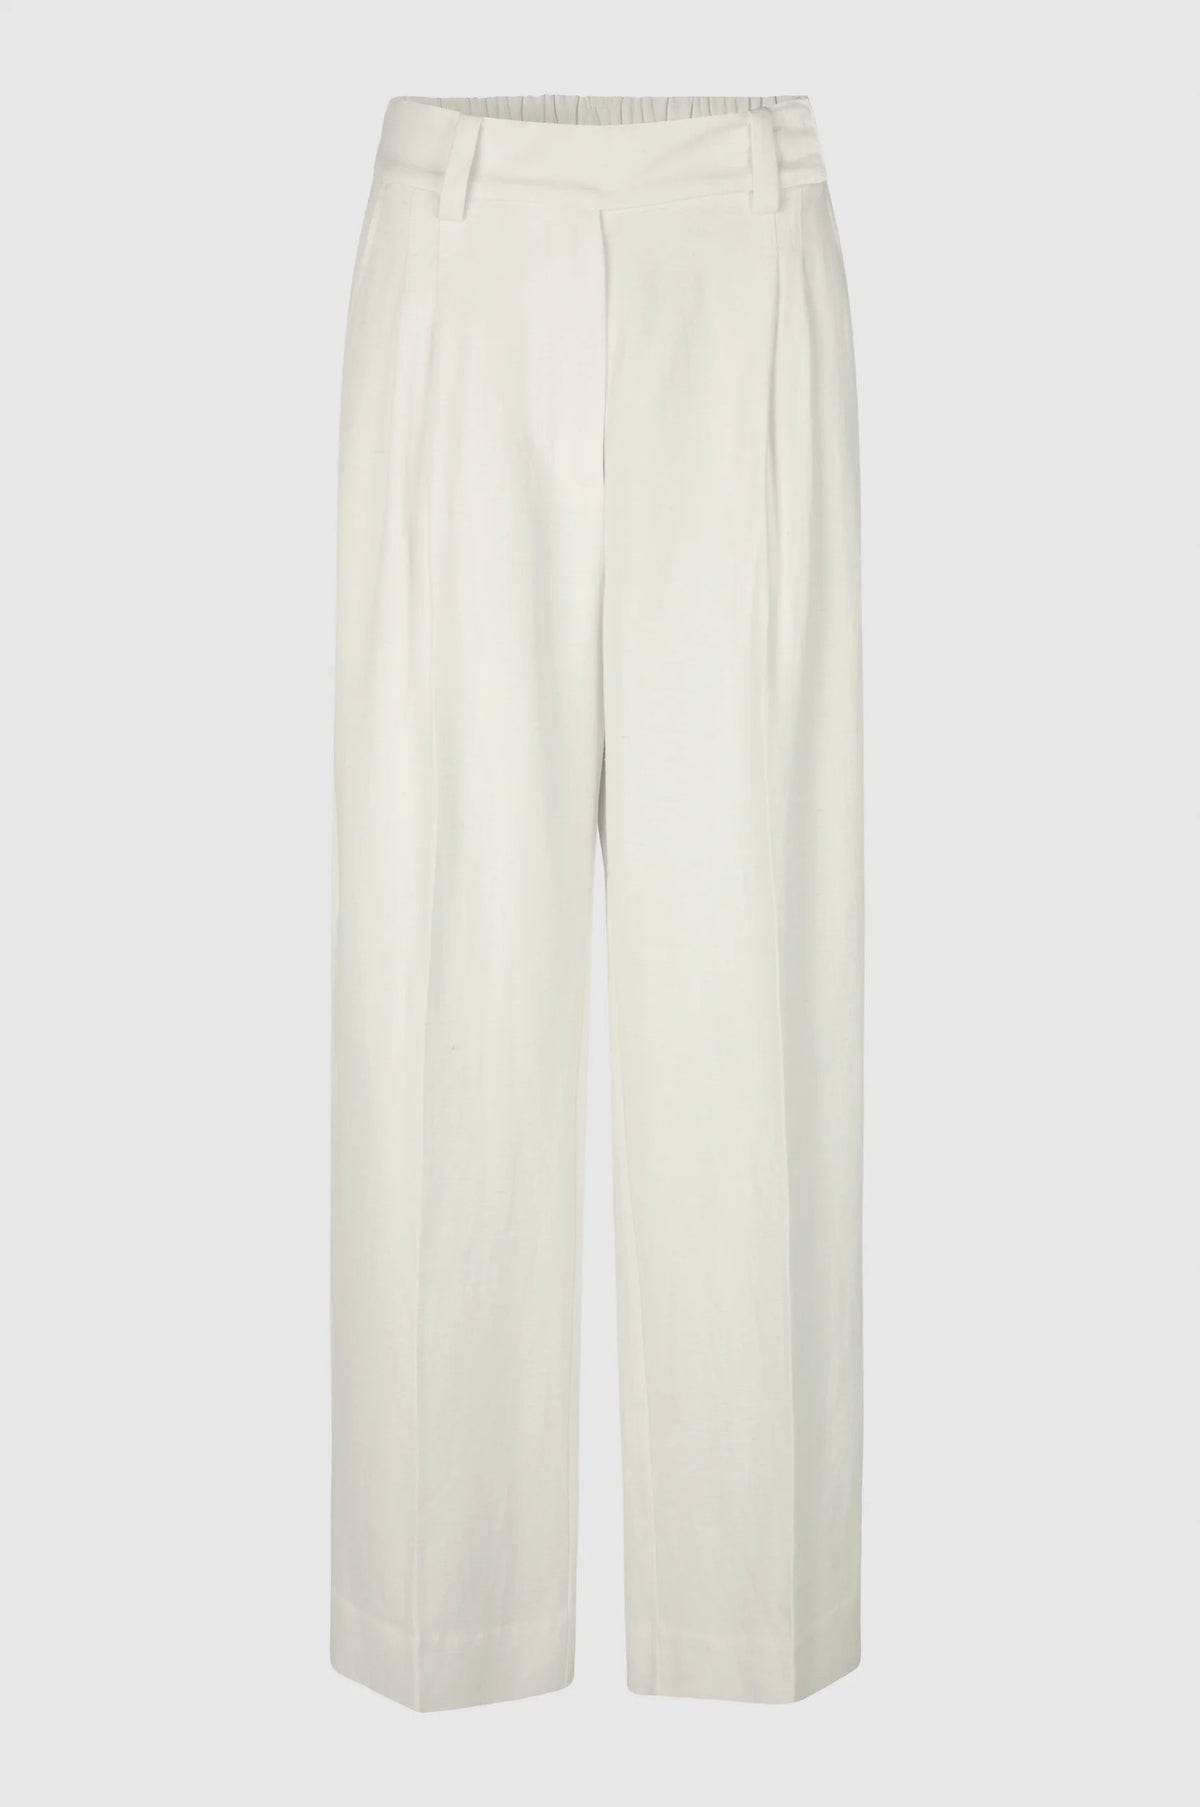 Off-white linen blend trousers with double pleated fronts and wide leg